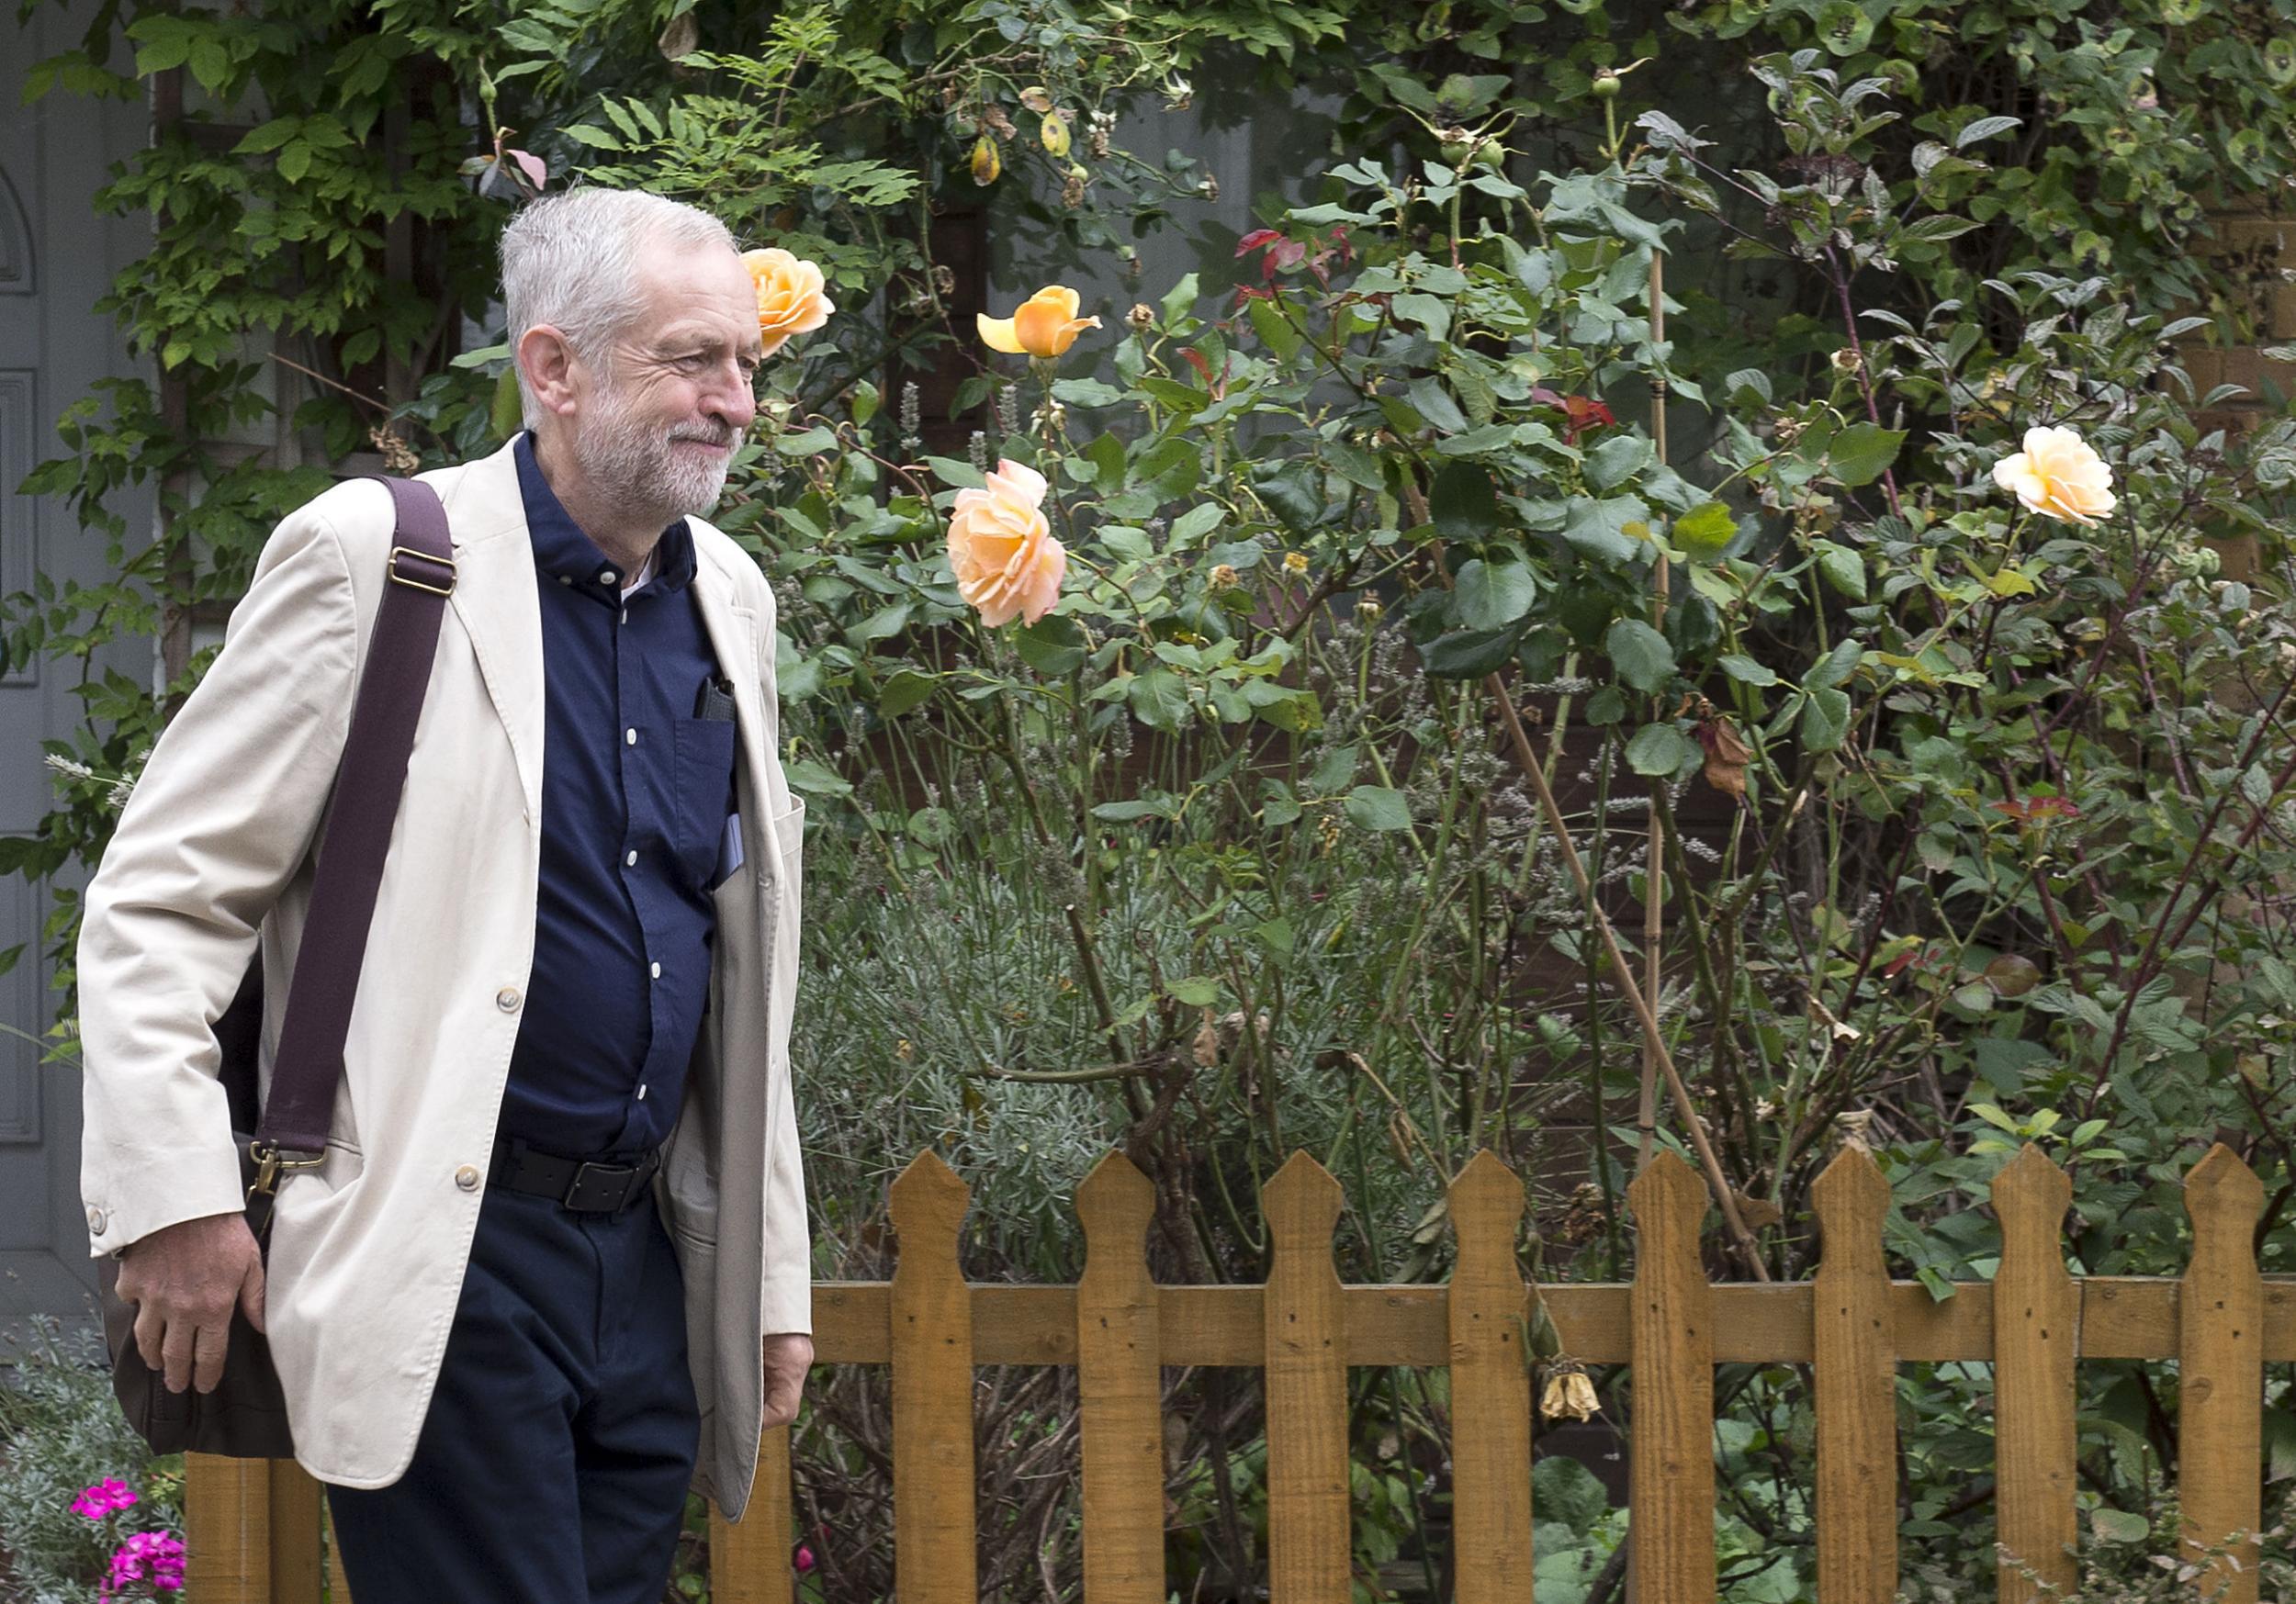 Jeremy Corbyn pleaded with journalists not to step on the bulbs growing in his front garden